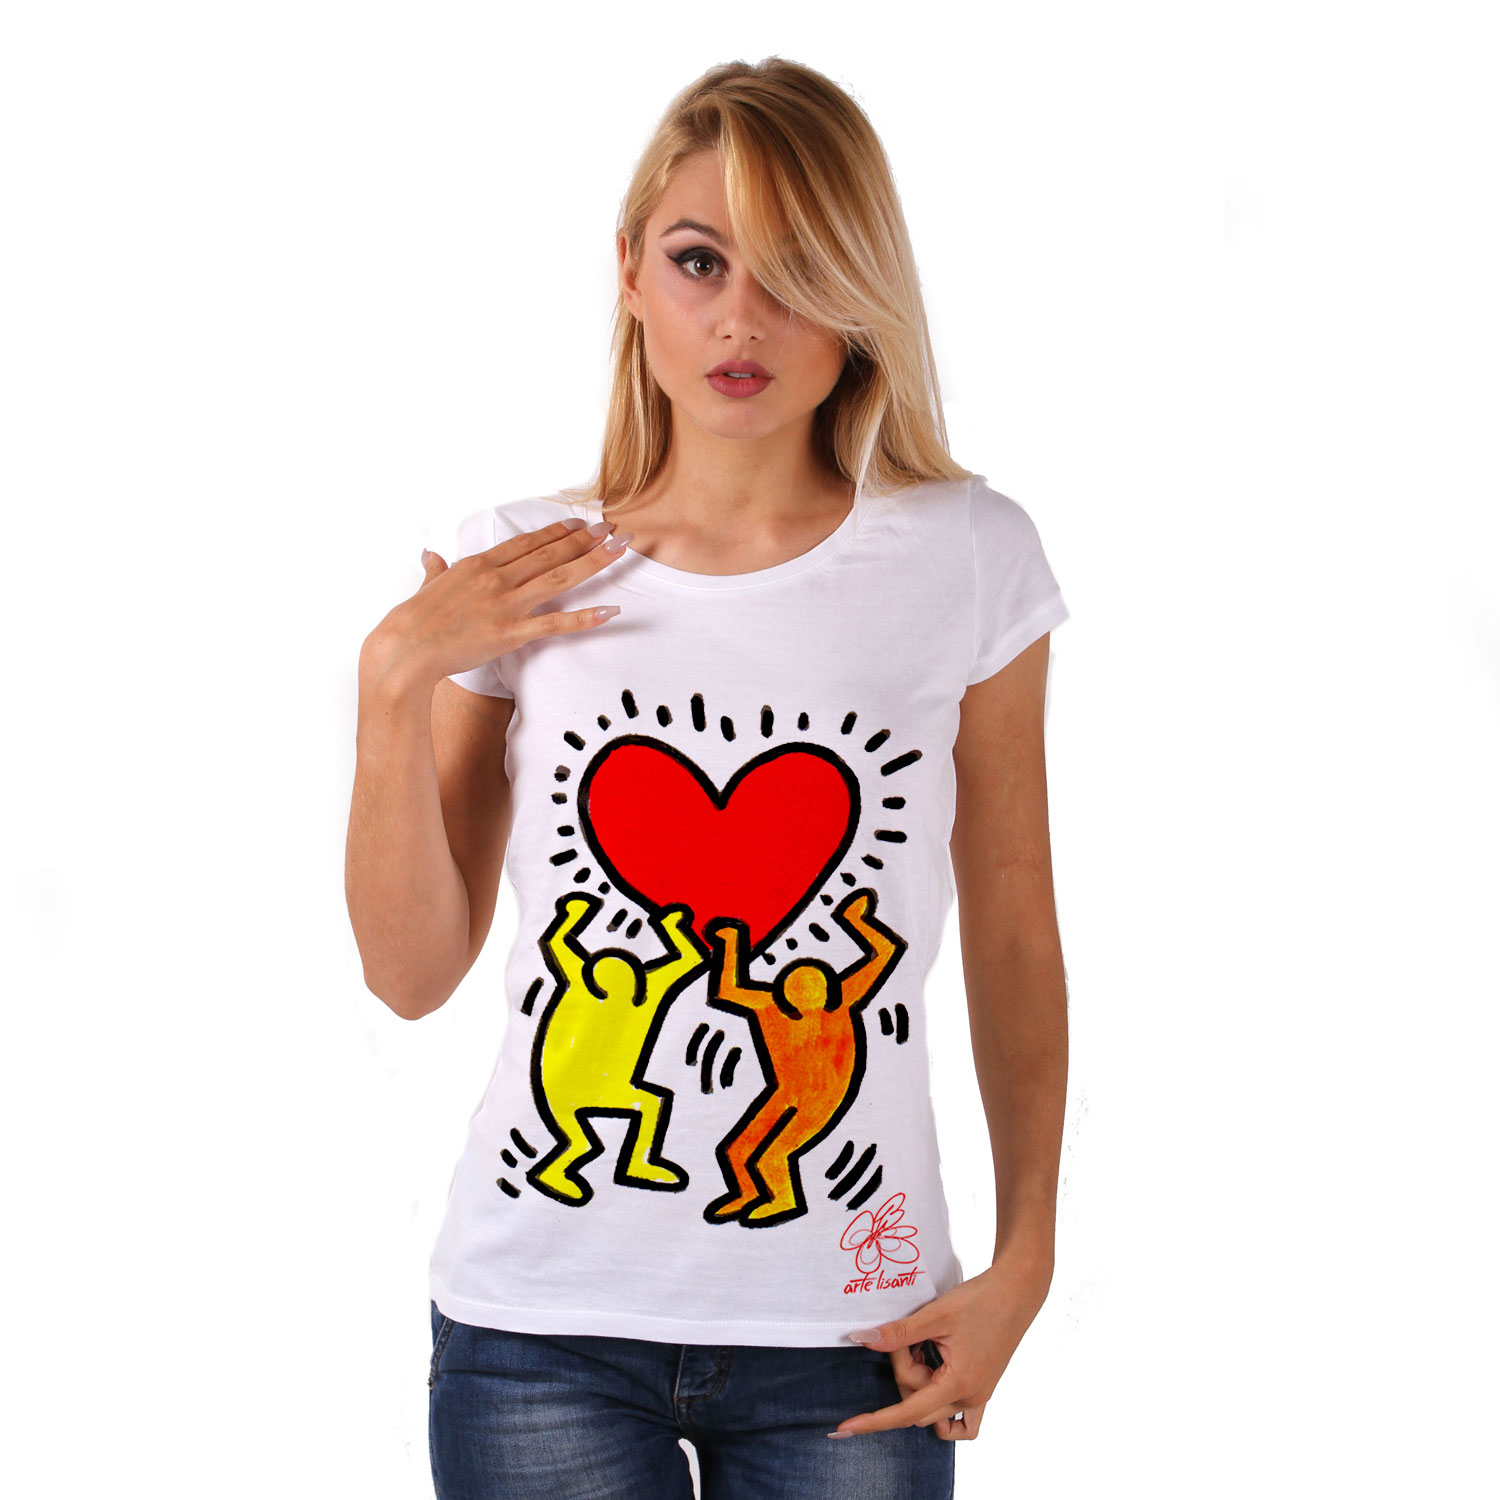 Hand-painted Jersey - Tribute to Keith Haring